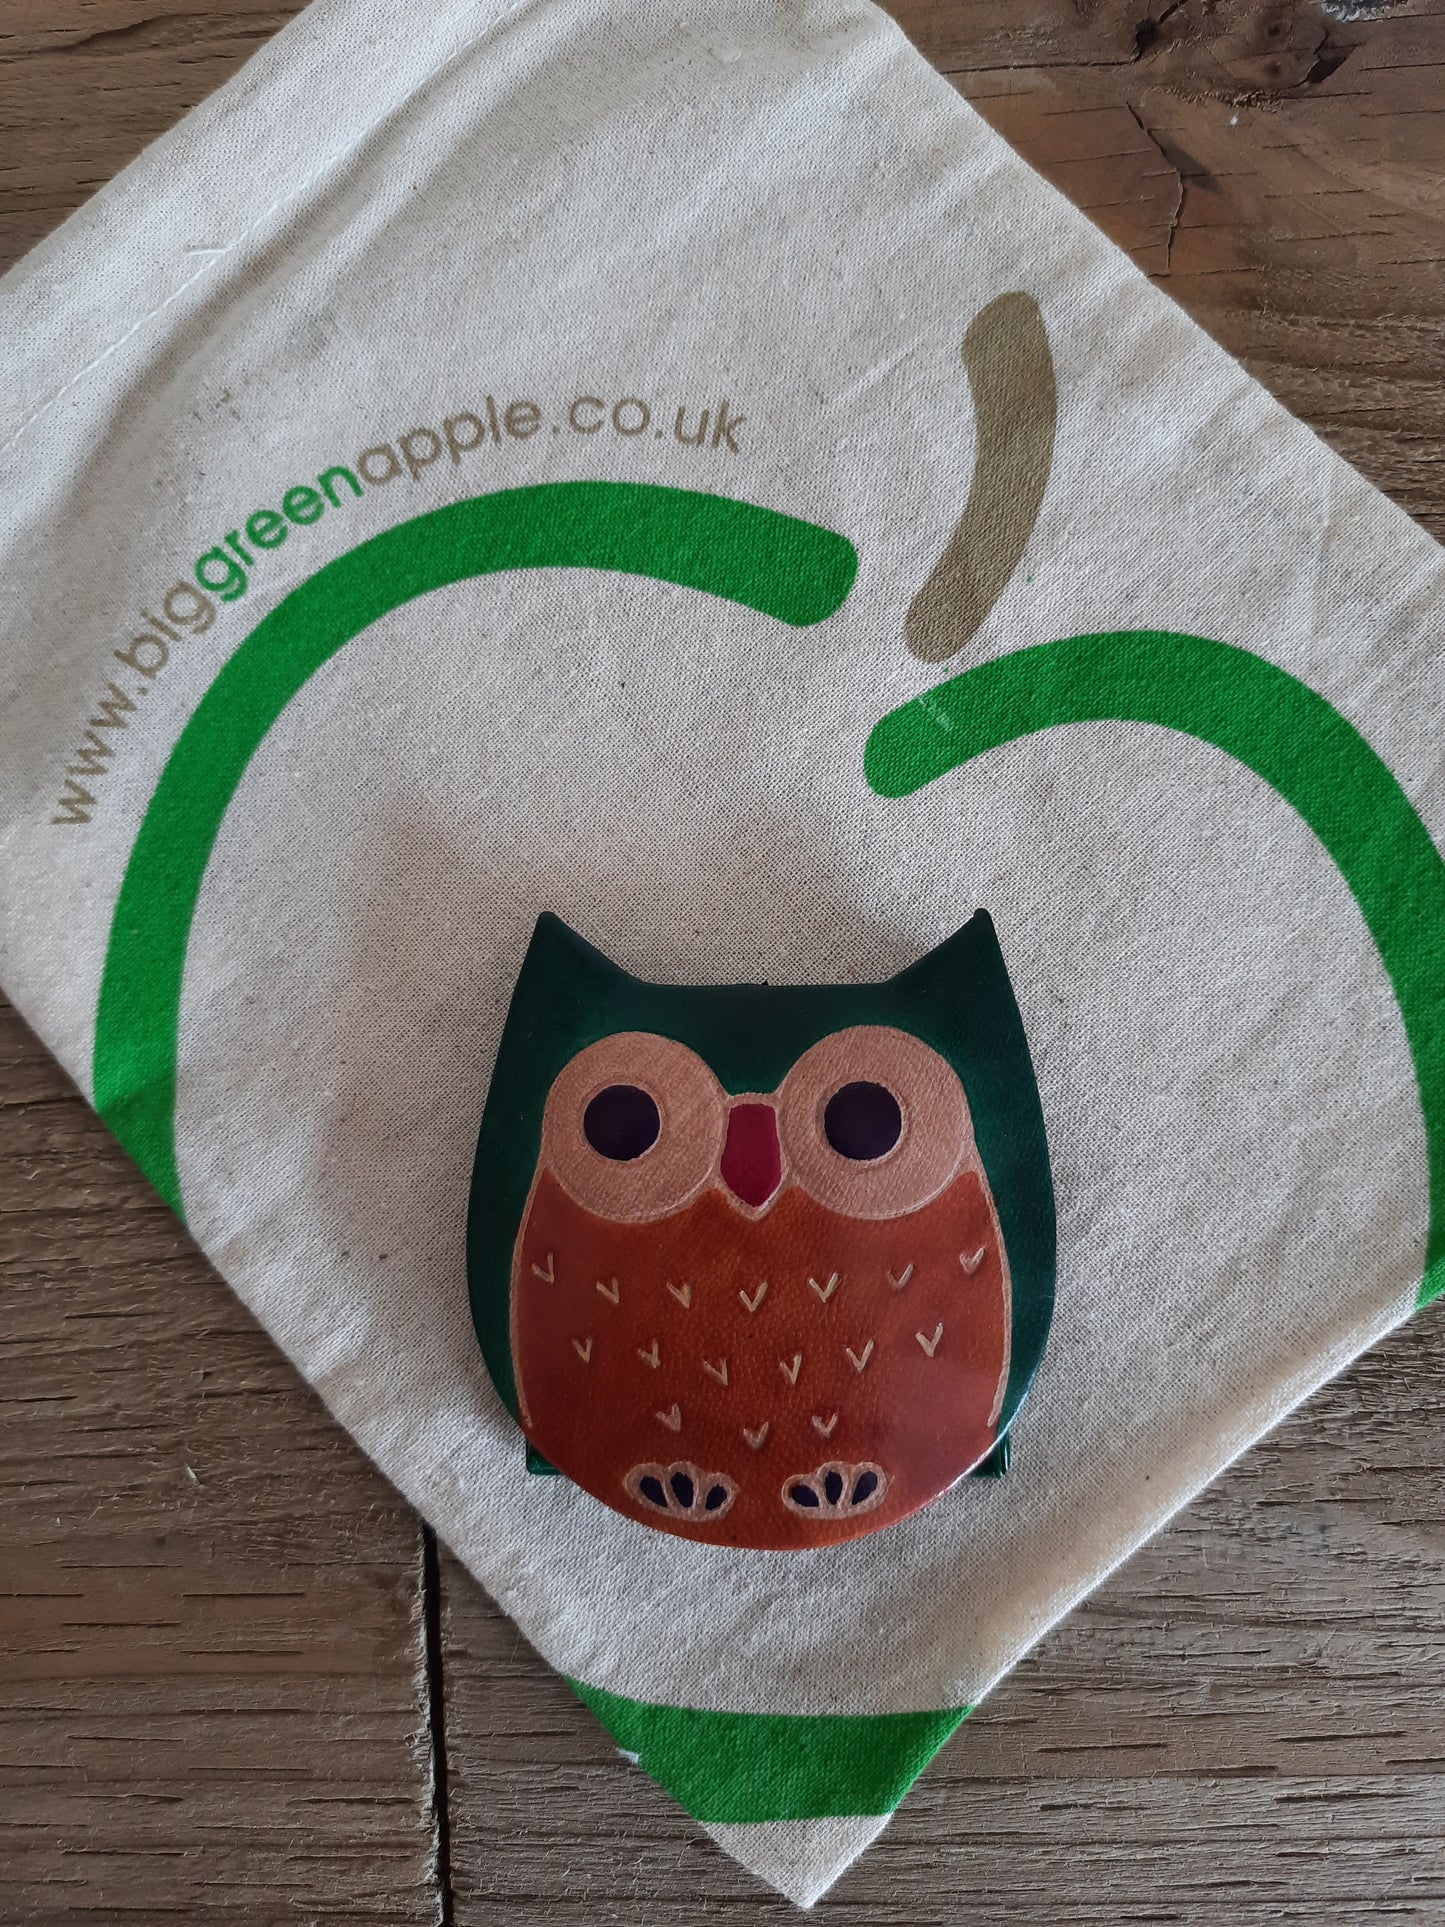 Fair Trade Owl Purse | Ethical Gifts For Her | Fair Trade Items | Eco Shop Online